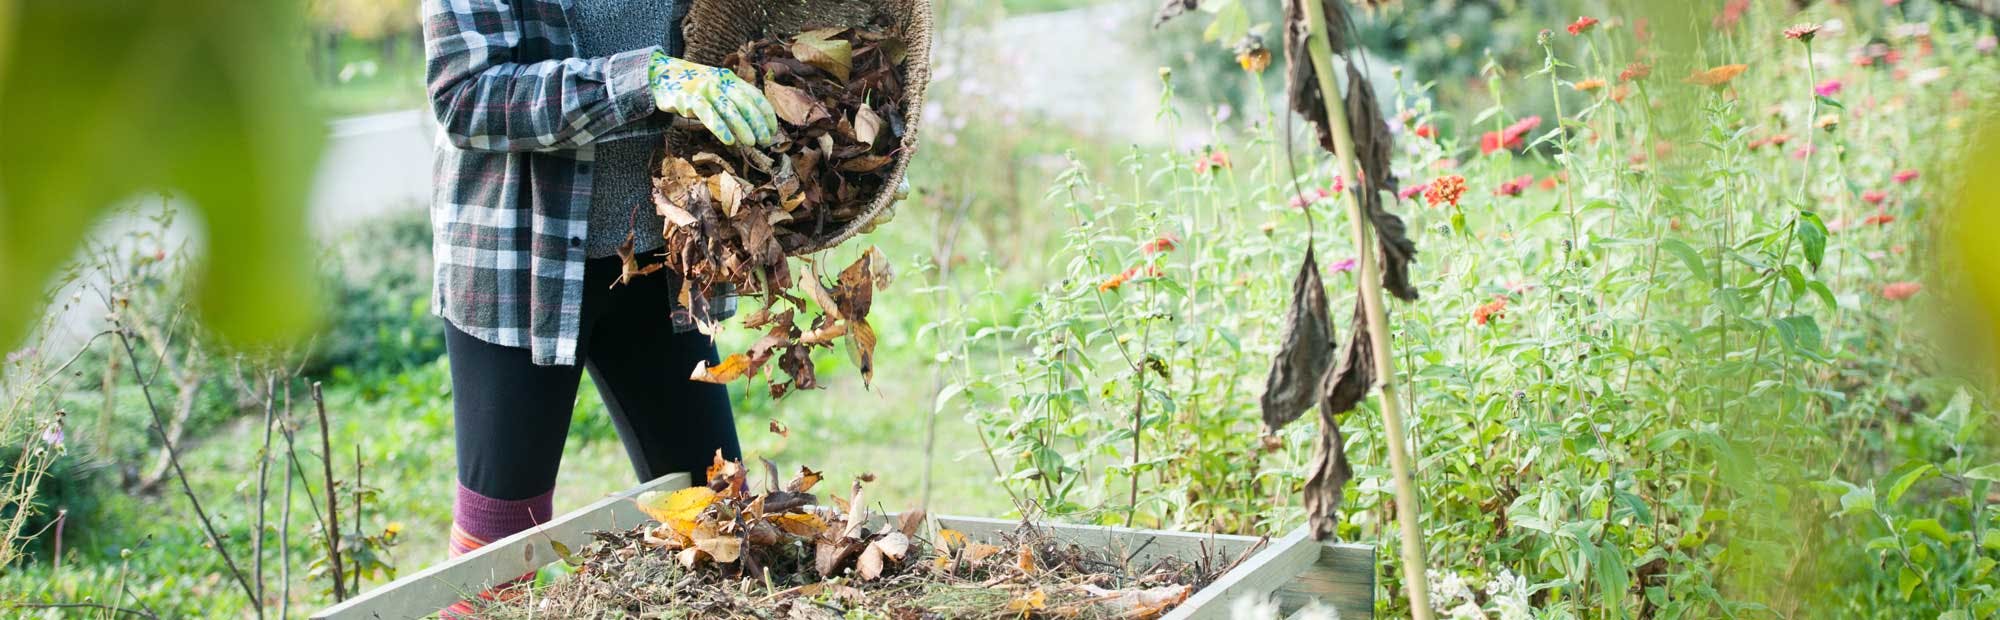 Woman putting leaves in a compost heap in a garden